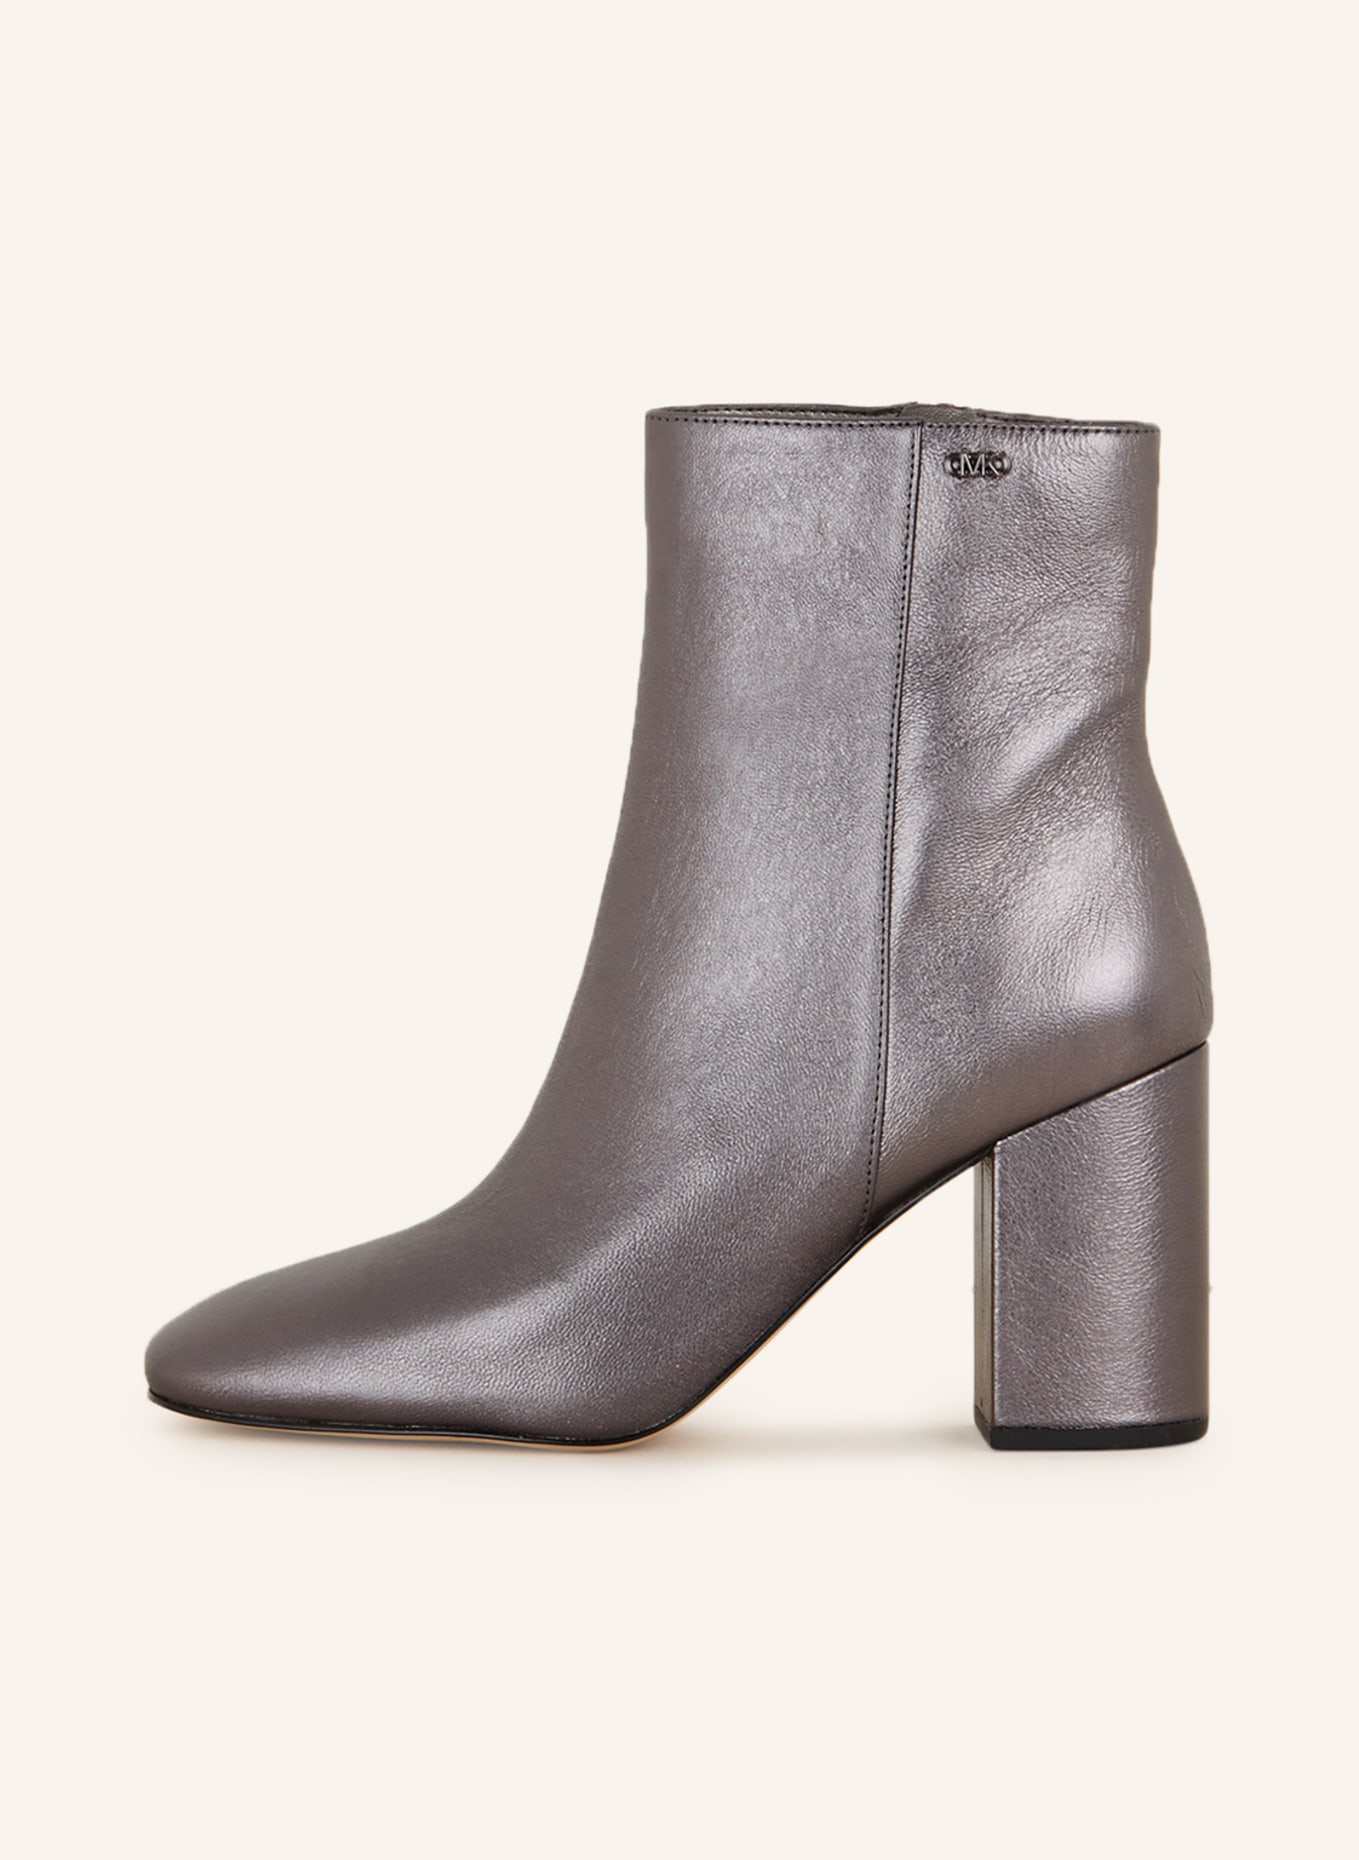 MICHAEL KORS Ankle boots, Color: 021 ANTRACITE (Image 4)